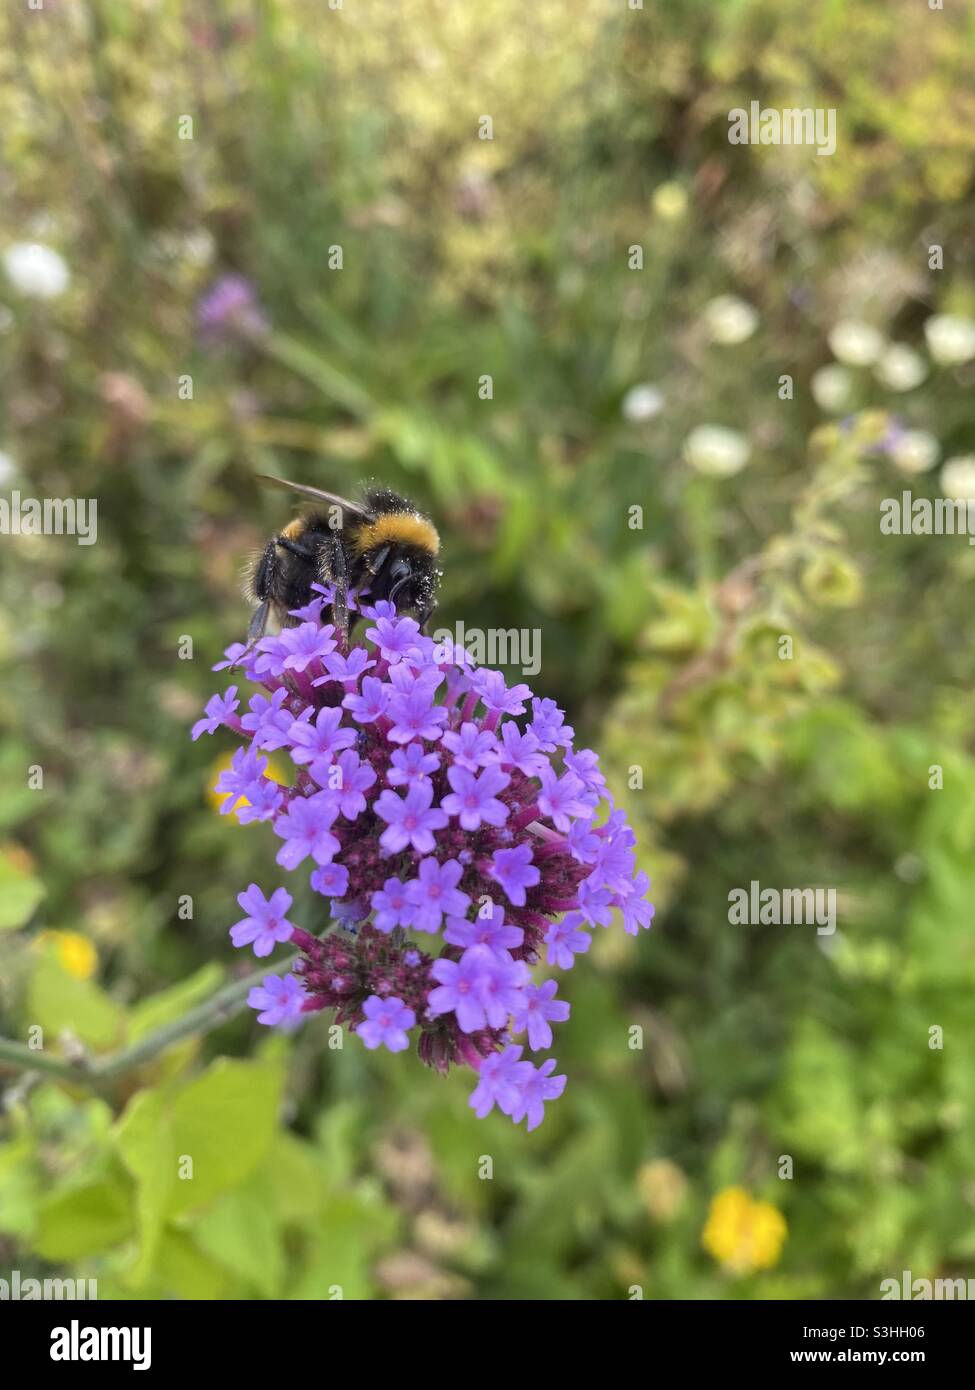 Bumble Bee collecting pollen from flower Stock Photo